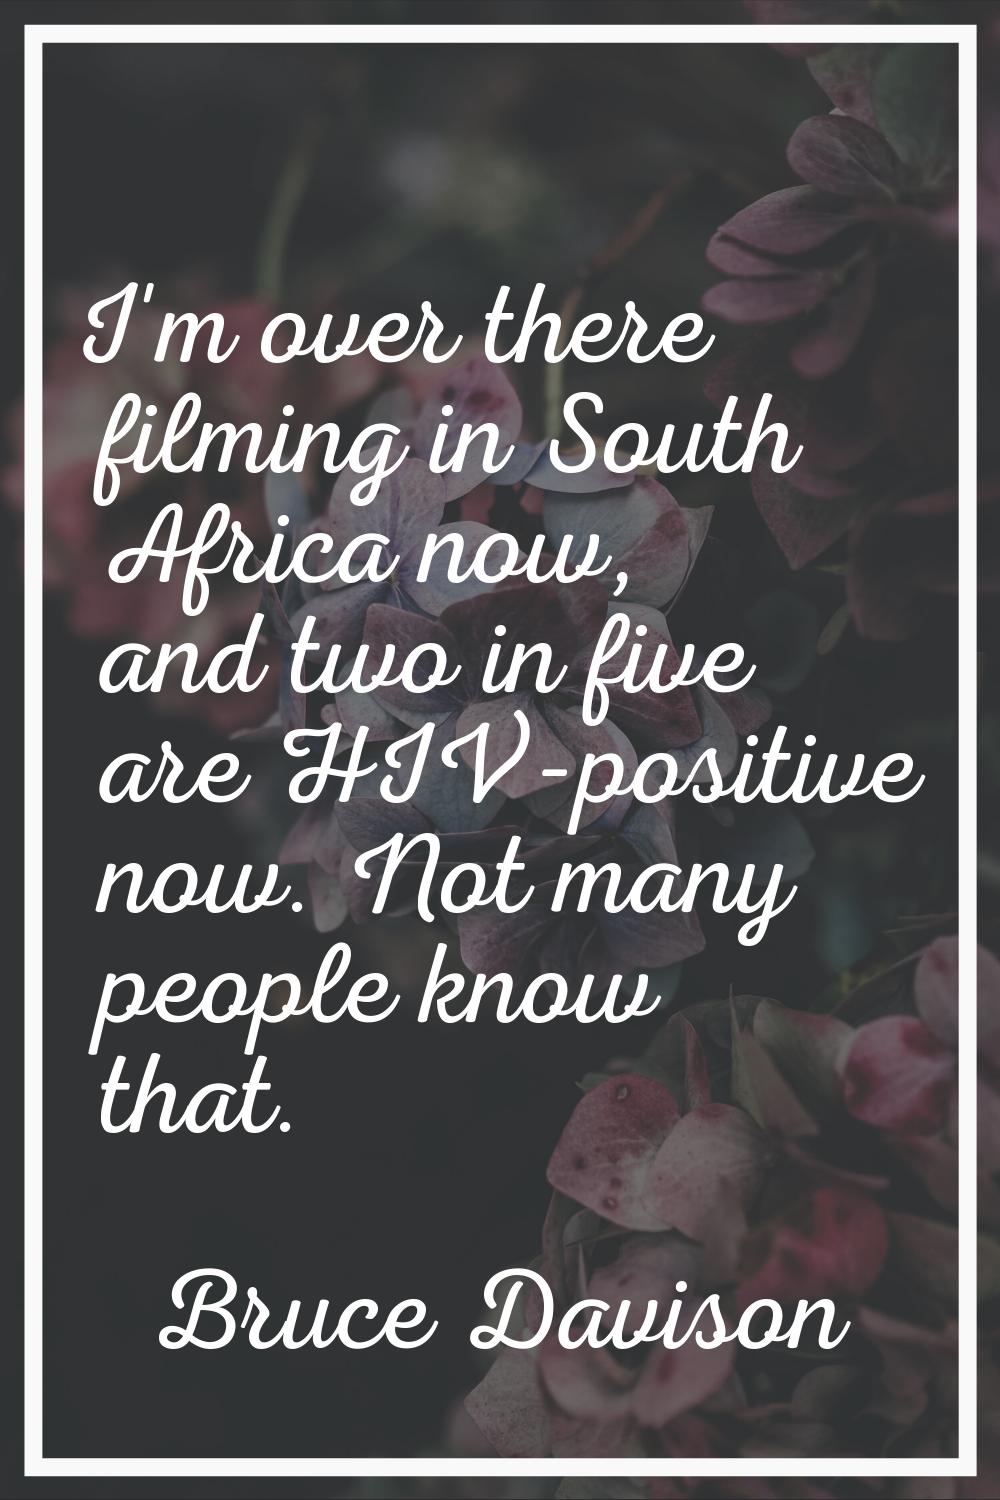 I'm over there filming in South Africa now, and two in five are HIV-positive now. Not many people k